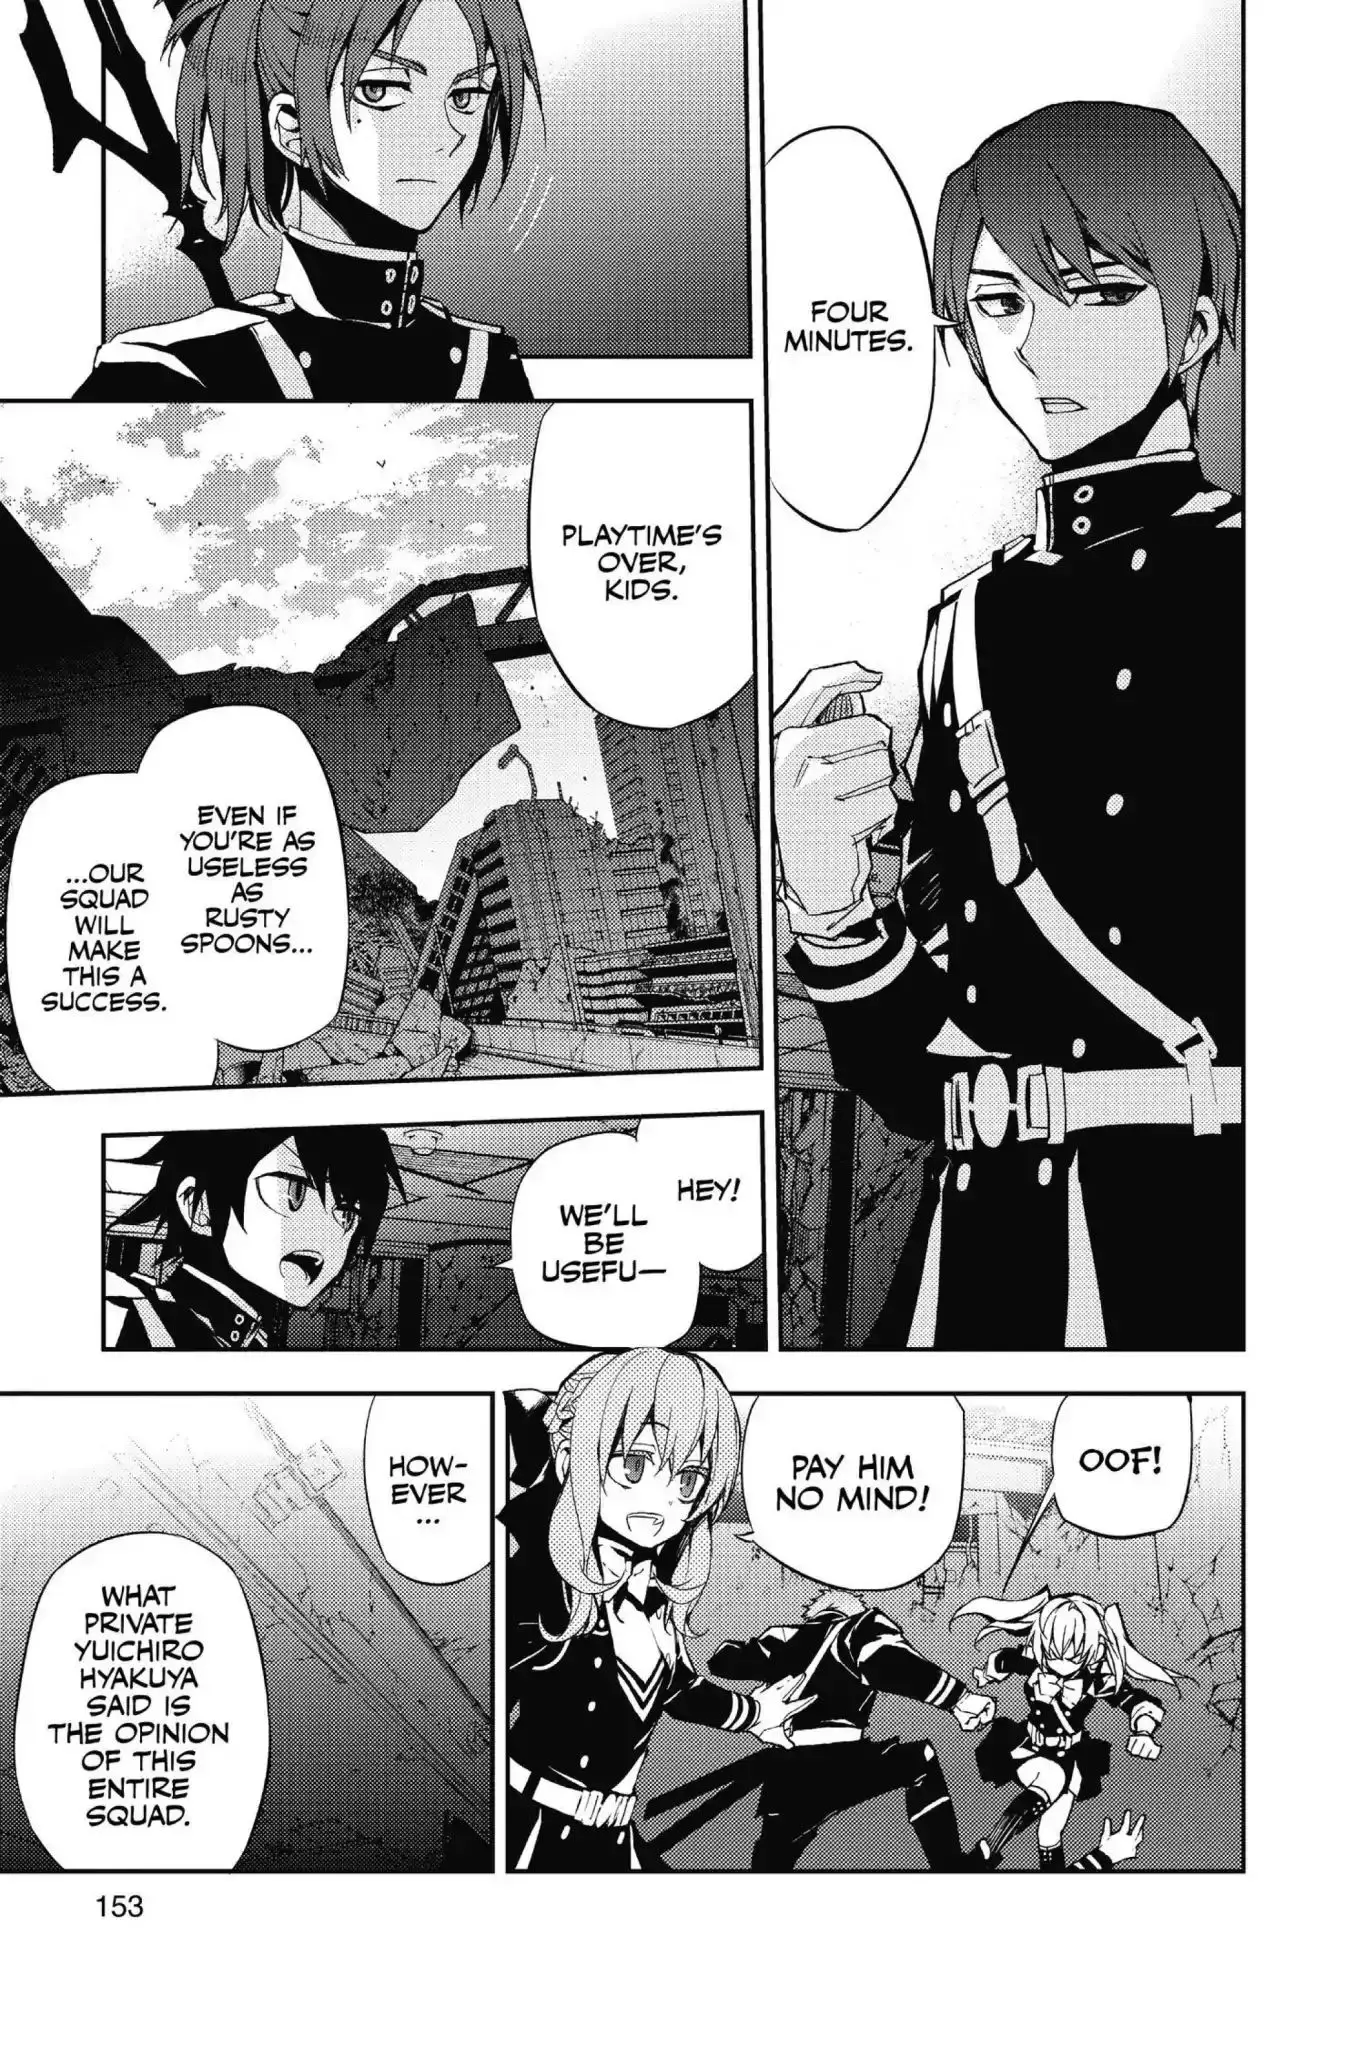 Seraph Of The End - 27 page 8-48979c0c